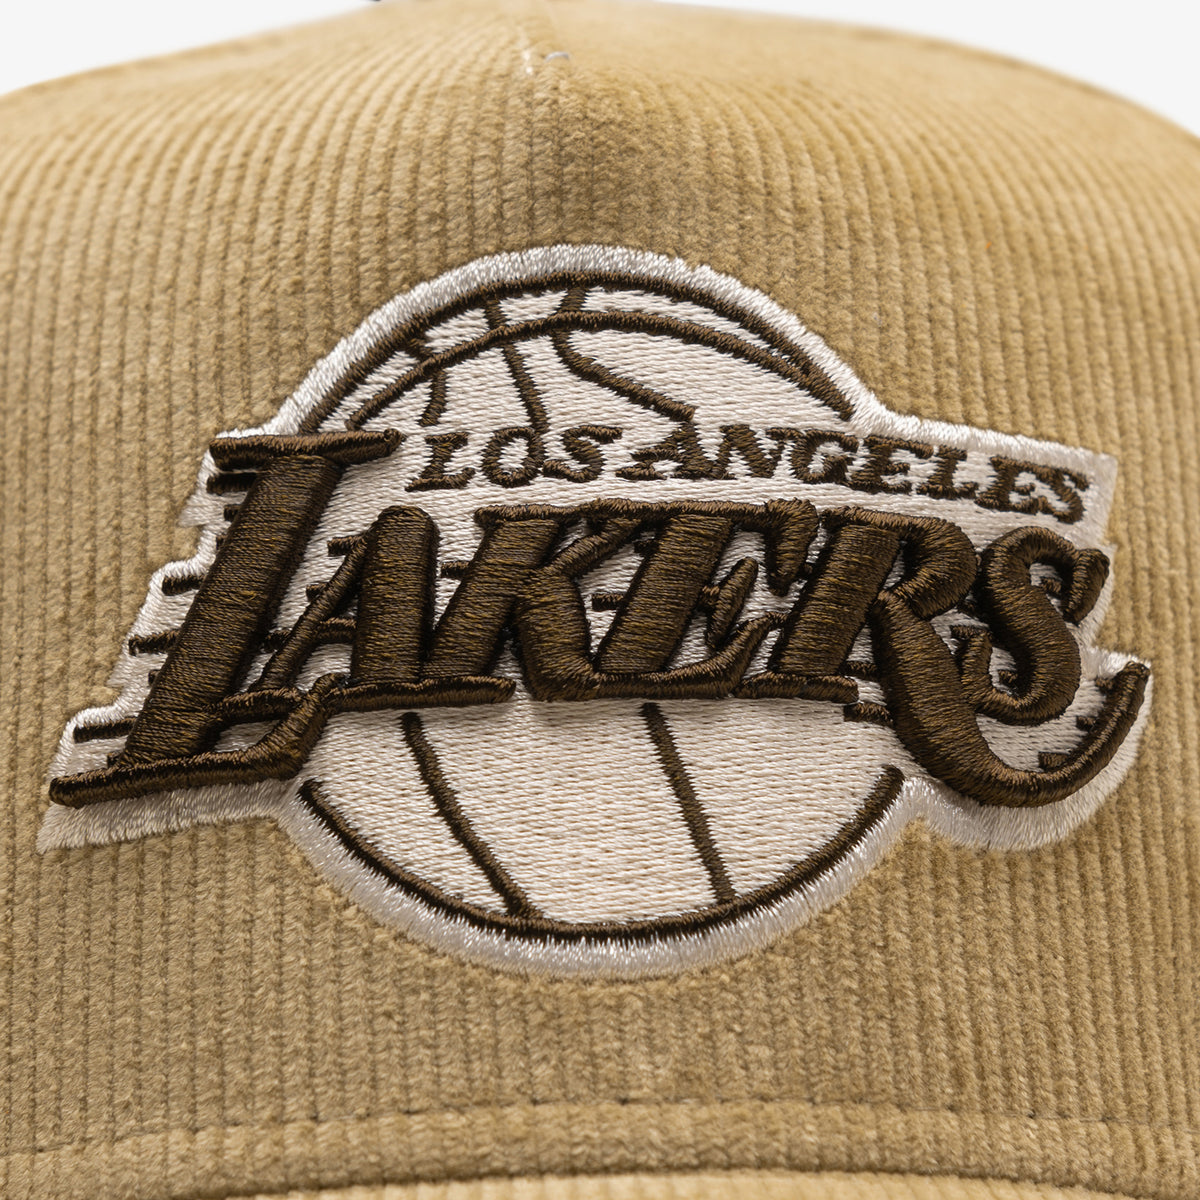 Los Angeles Lakers 9Forty Camel Cord A-Frame Snapback - Beige